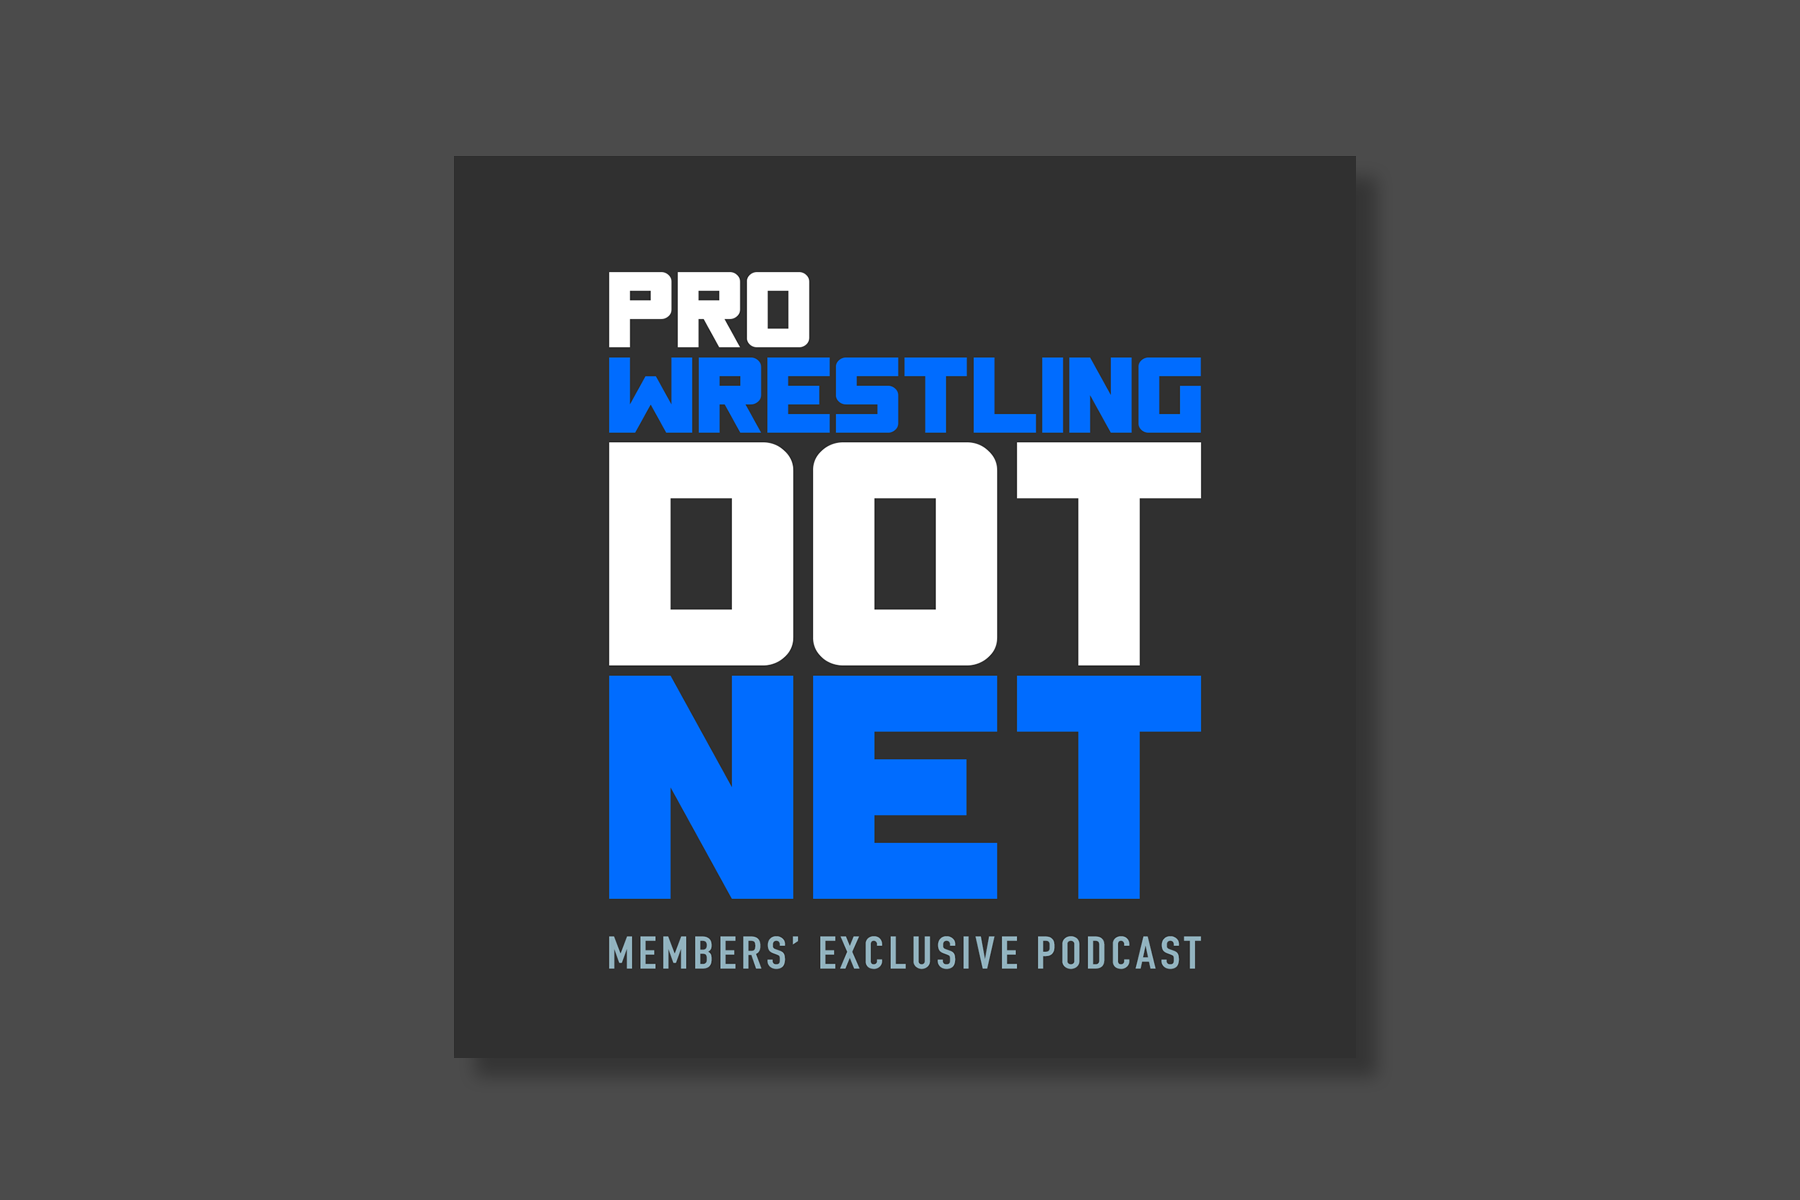 03/07 Moore’s NXT audio review: Roadblock theme with Shawn Michaels on the Grayson Waller Effect, Roxanne Perez vs. Meiko Satomura for the NXT Women’s Title, Jacy Jayne vs. Gigi Dolin, Bron Breakker and The Creeds vs. Jinder Mahal and Indus Sher, Dijak vs. Tony D’Angelo in a jailhouse street fight